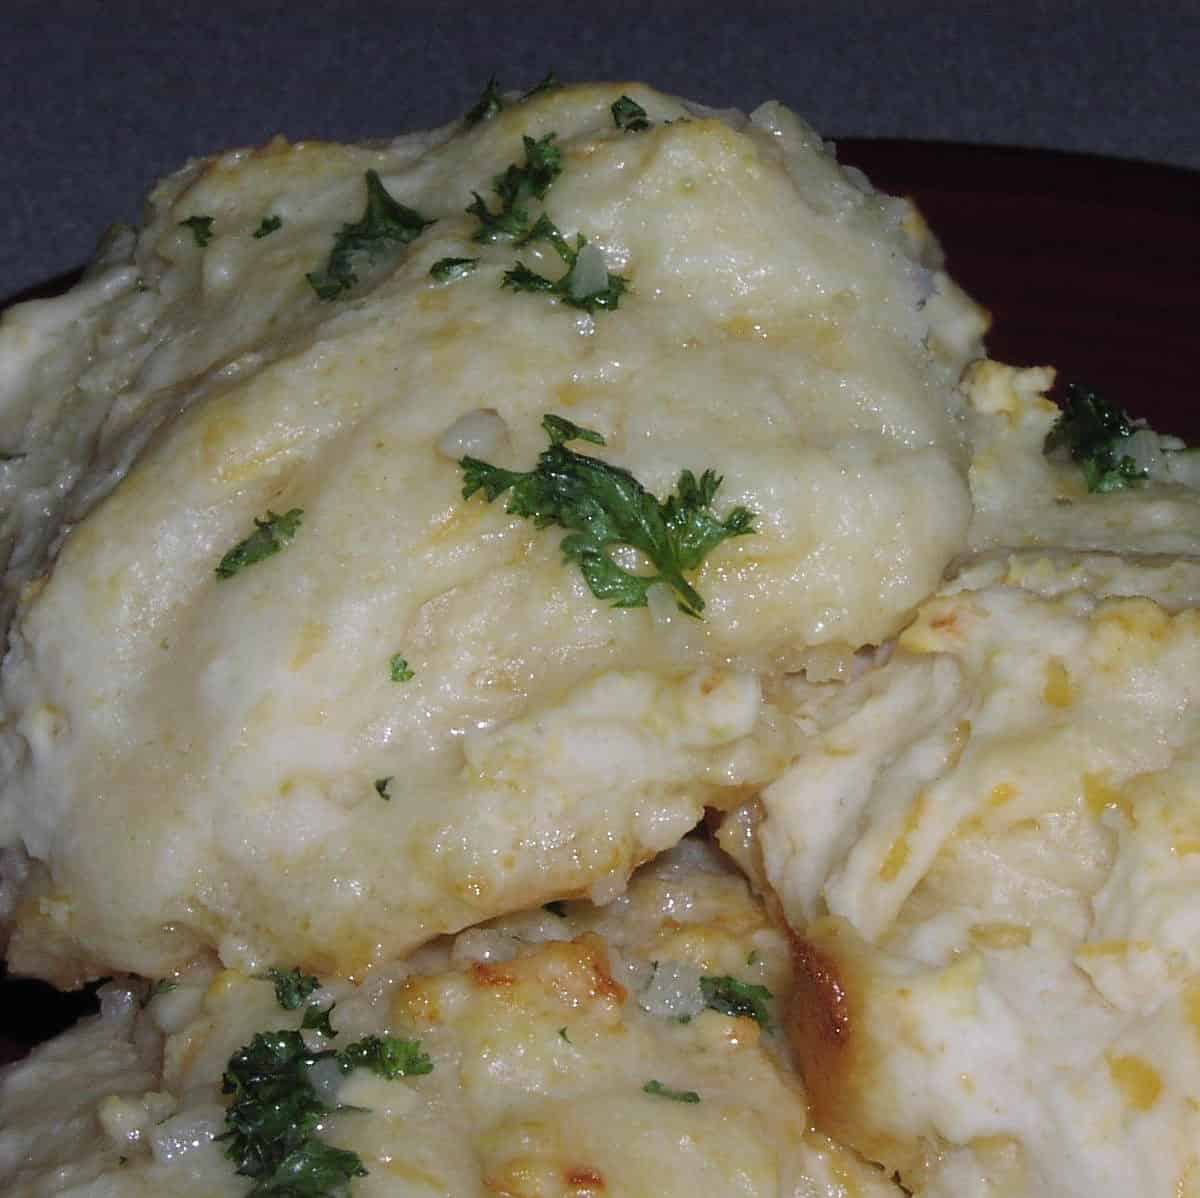  Sprinkle on some extra herbs and cheese for a gourmet twist on the classic Red Lobster recipe.